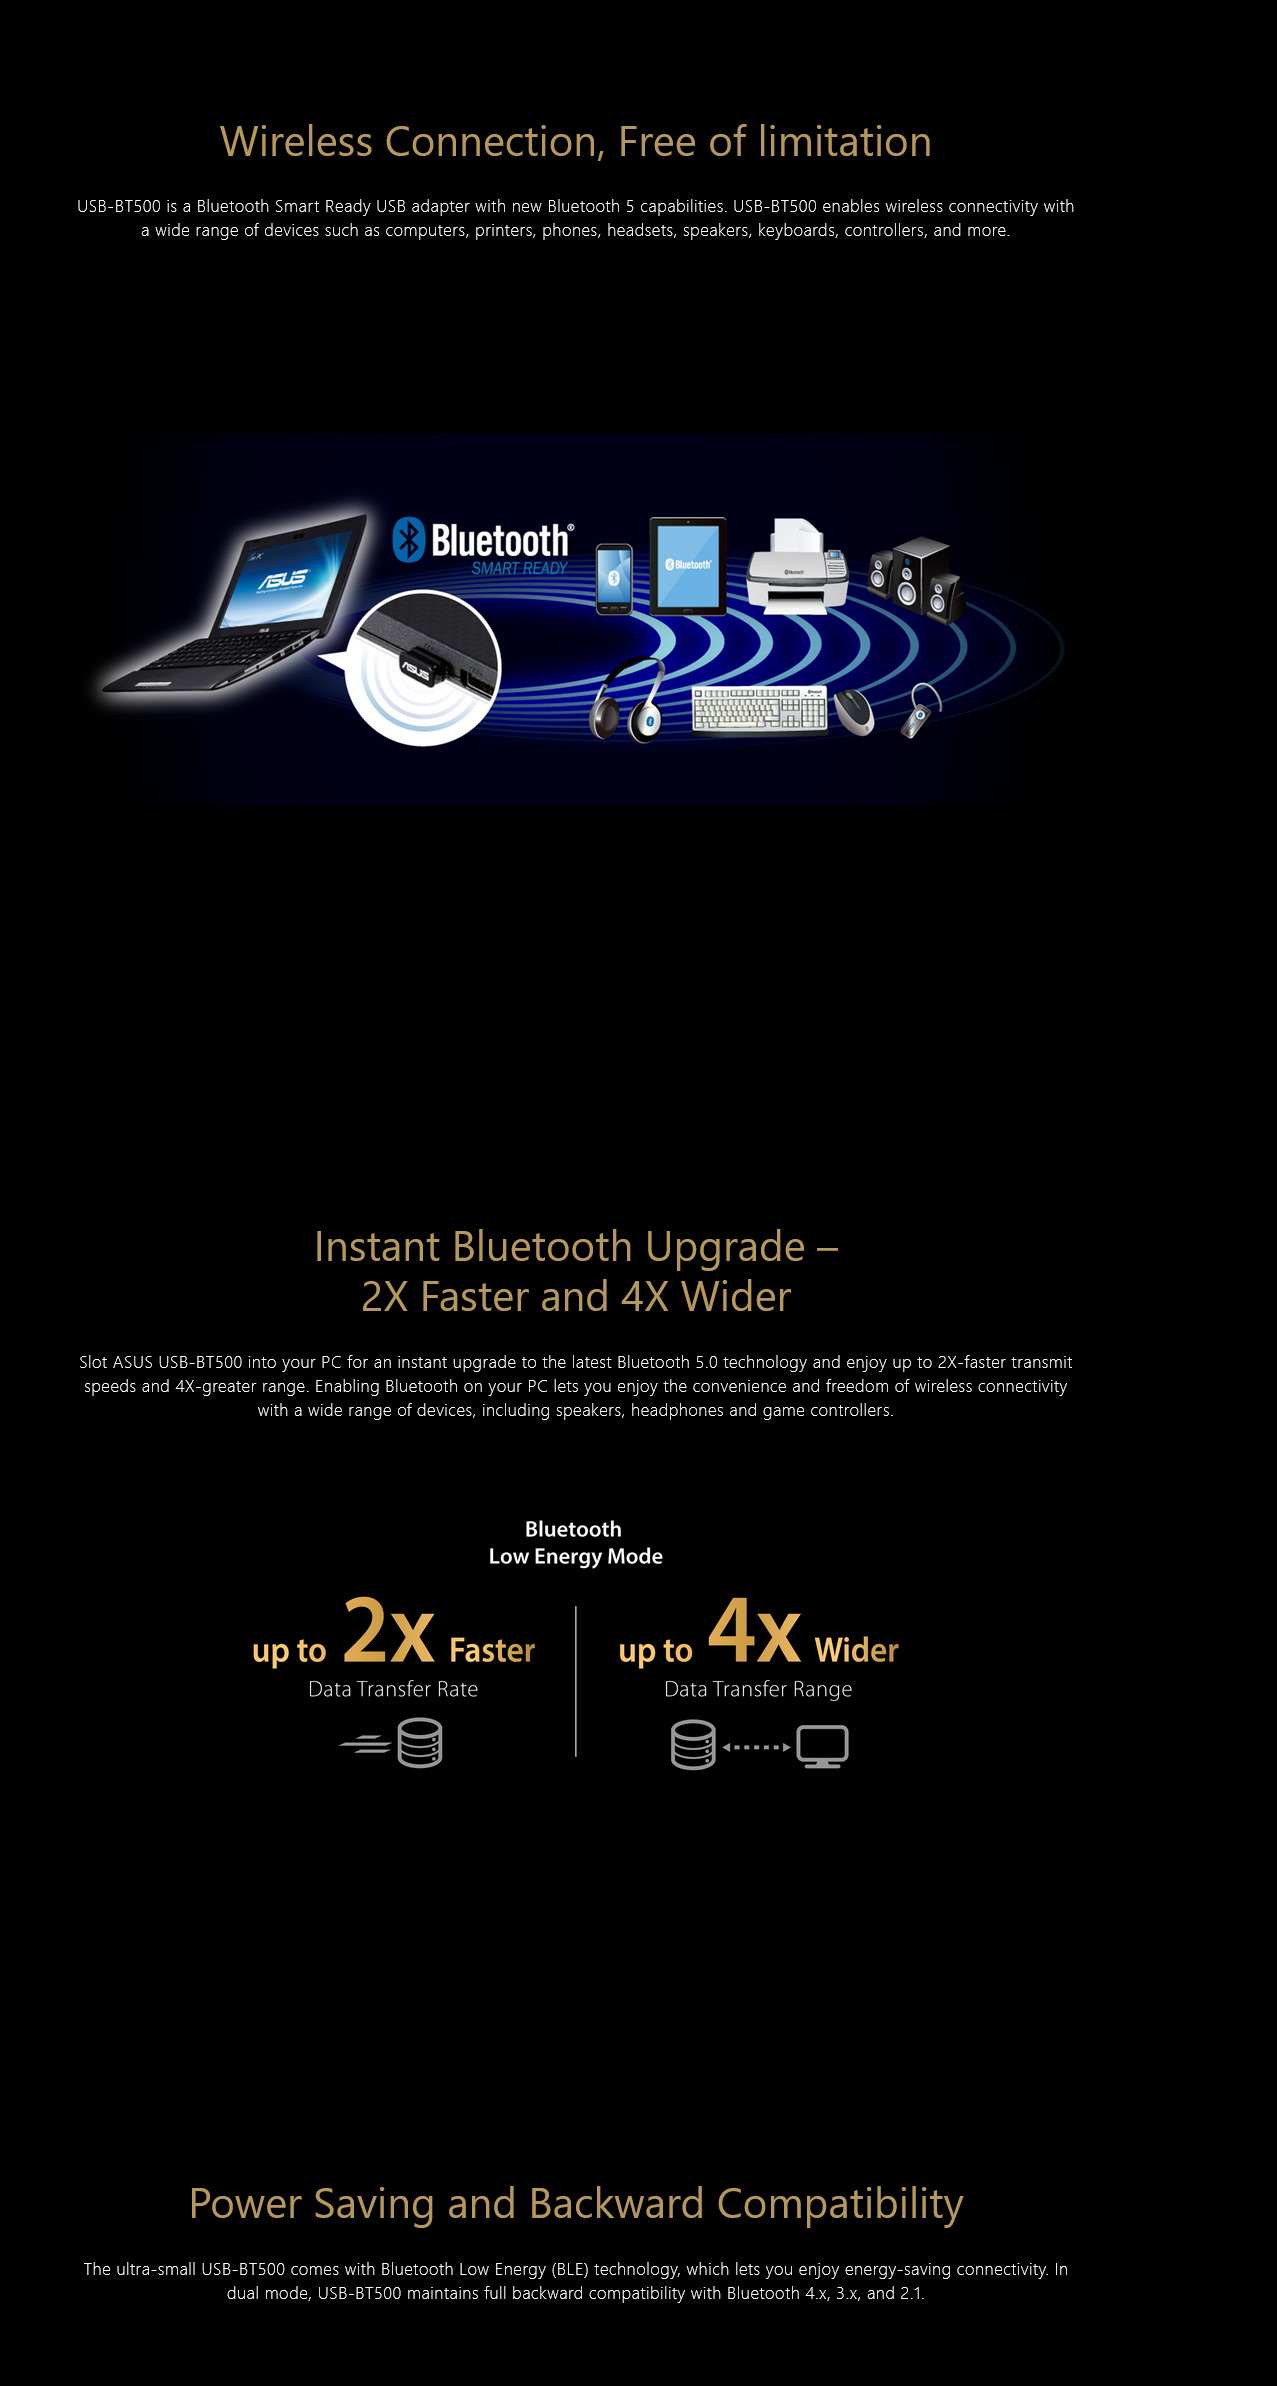 A large marketing image providing additional information about the product ASUS USB-BT500 Bluetooth 5.0 USB Adapter - Additional alt info not provided